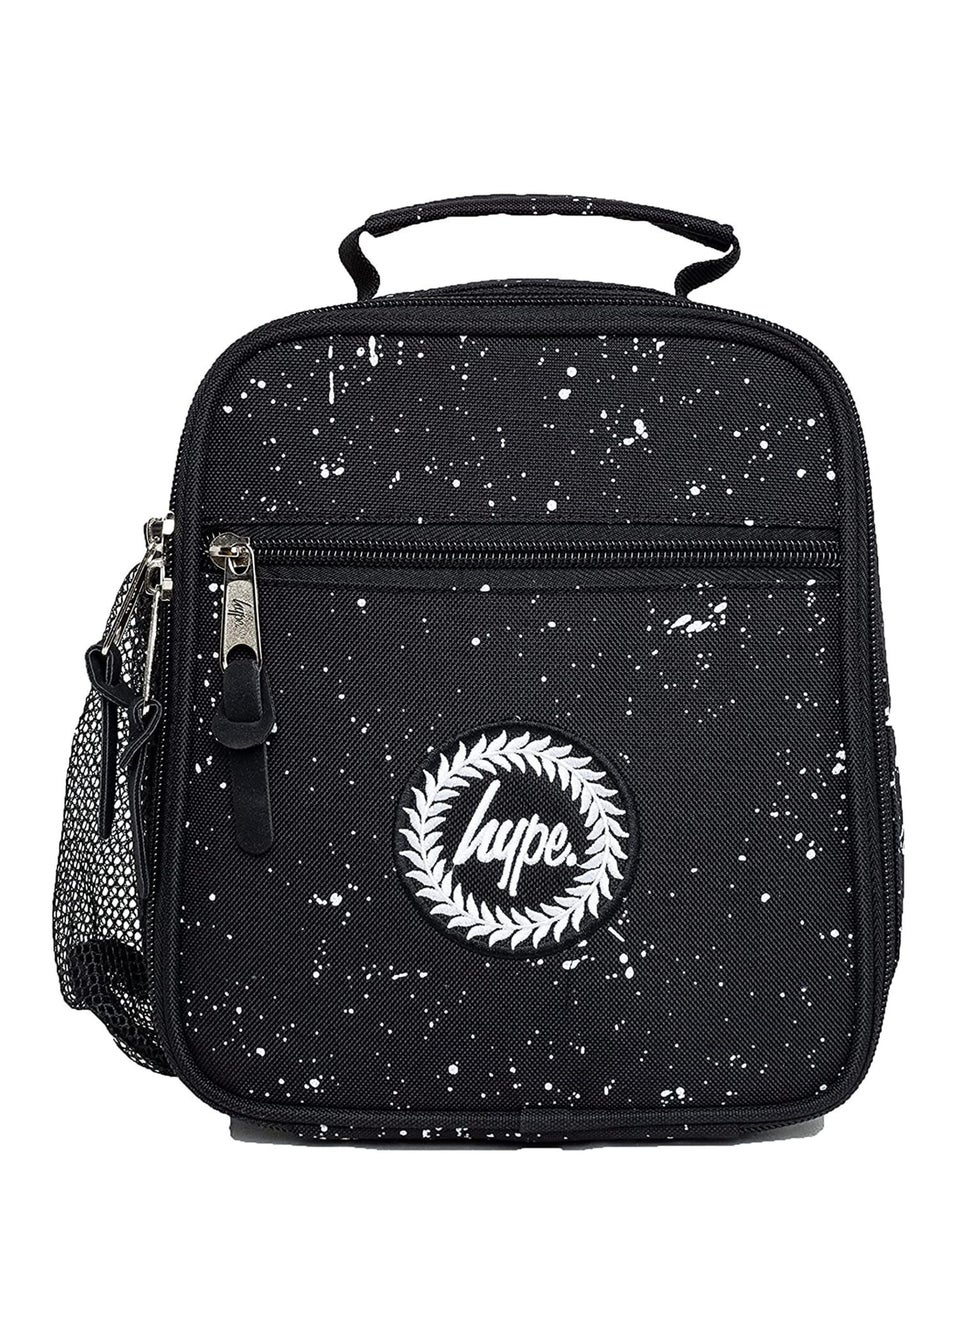 Hype Black/White Speckle Lunch Bag